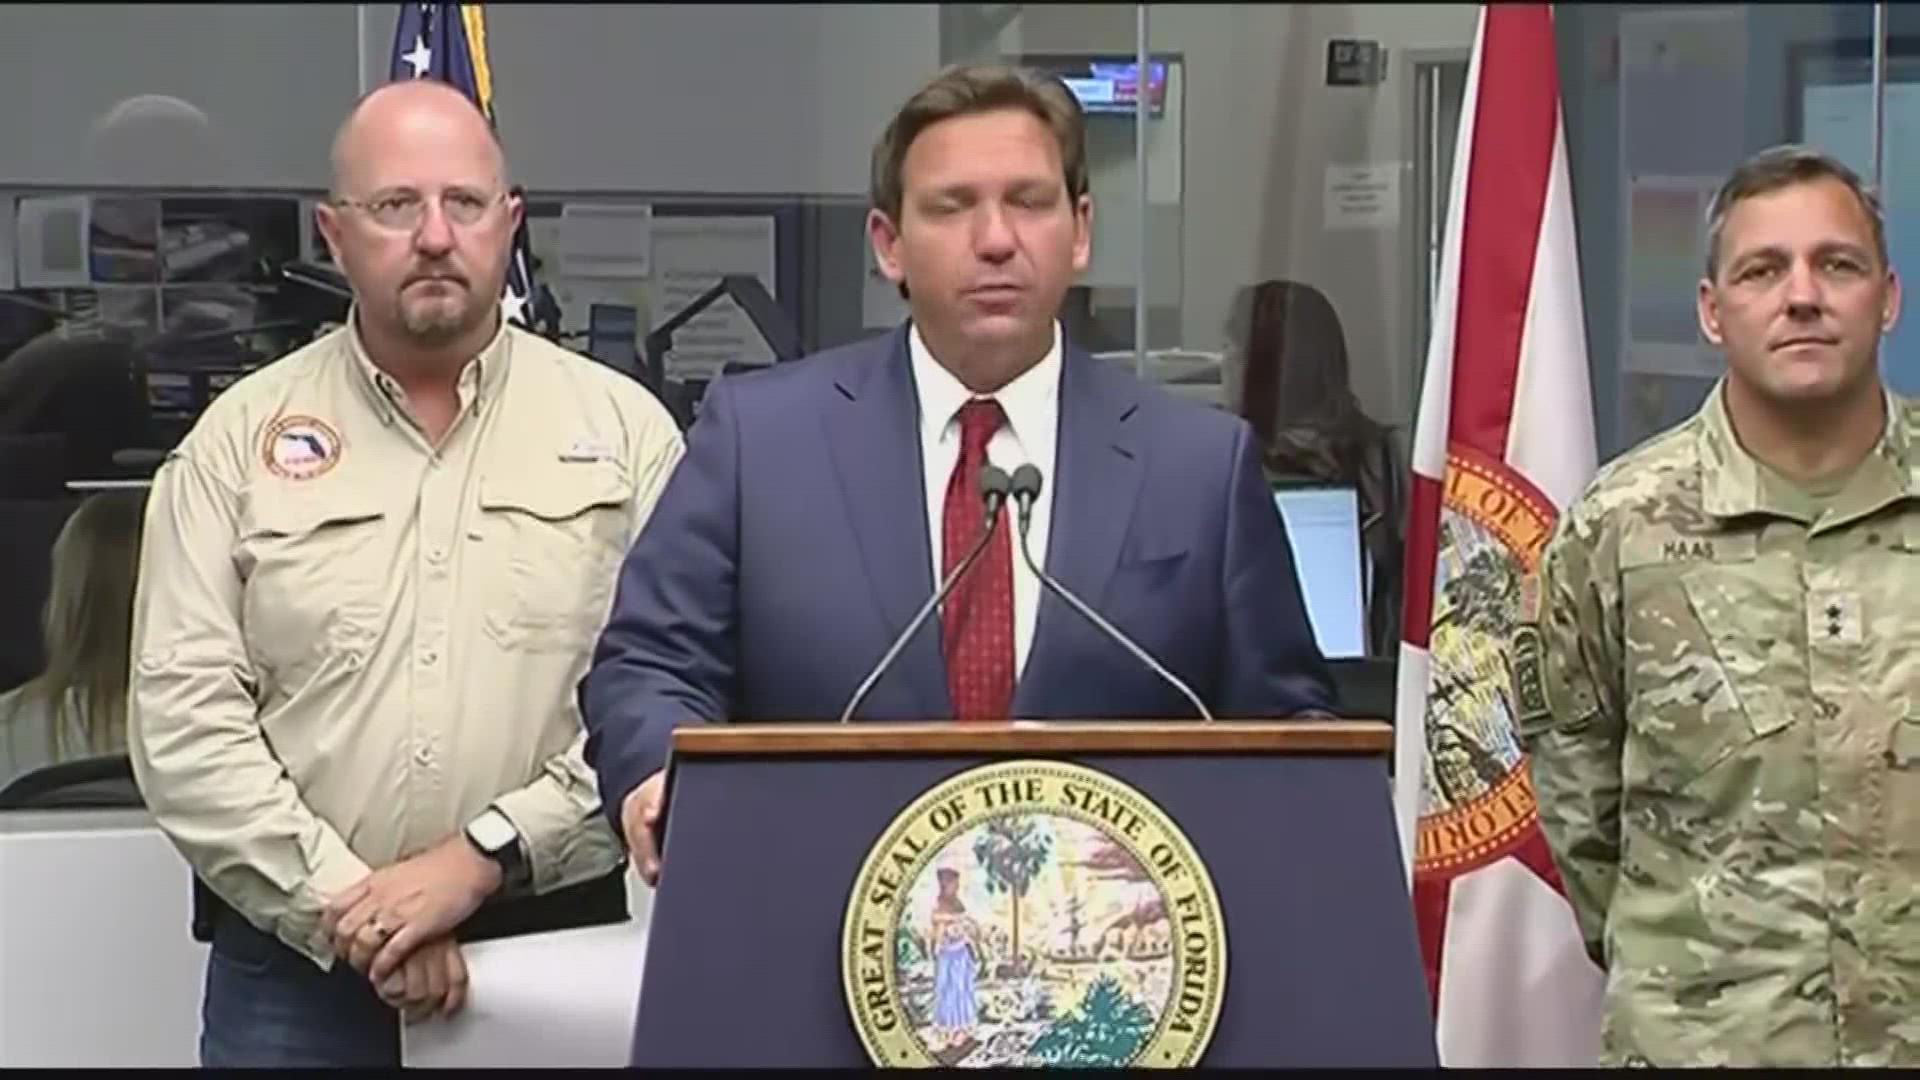 The governor urged people to be prepared as much of the state will feel the impacts of the storm. The storm is expected to make landfall early Thursday morning.